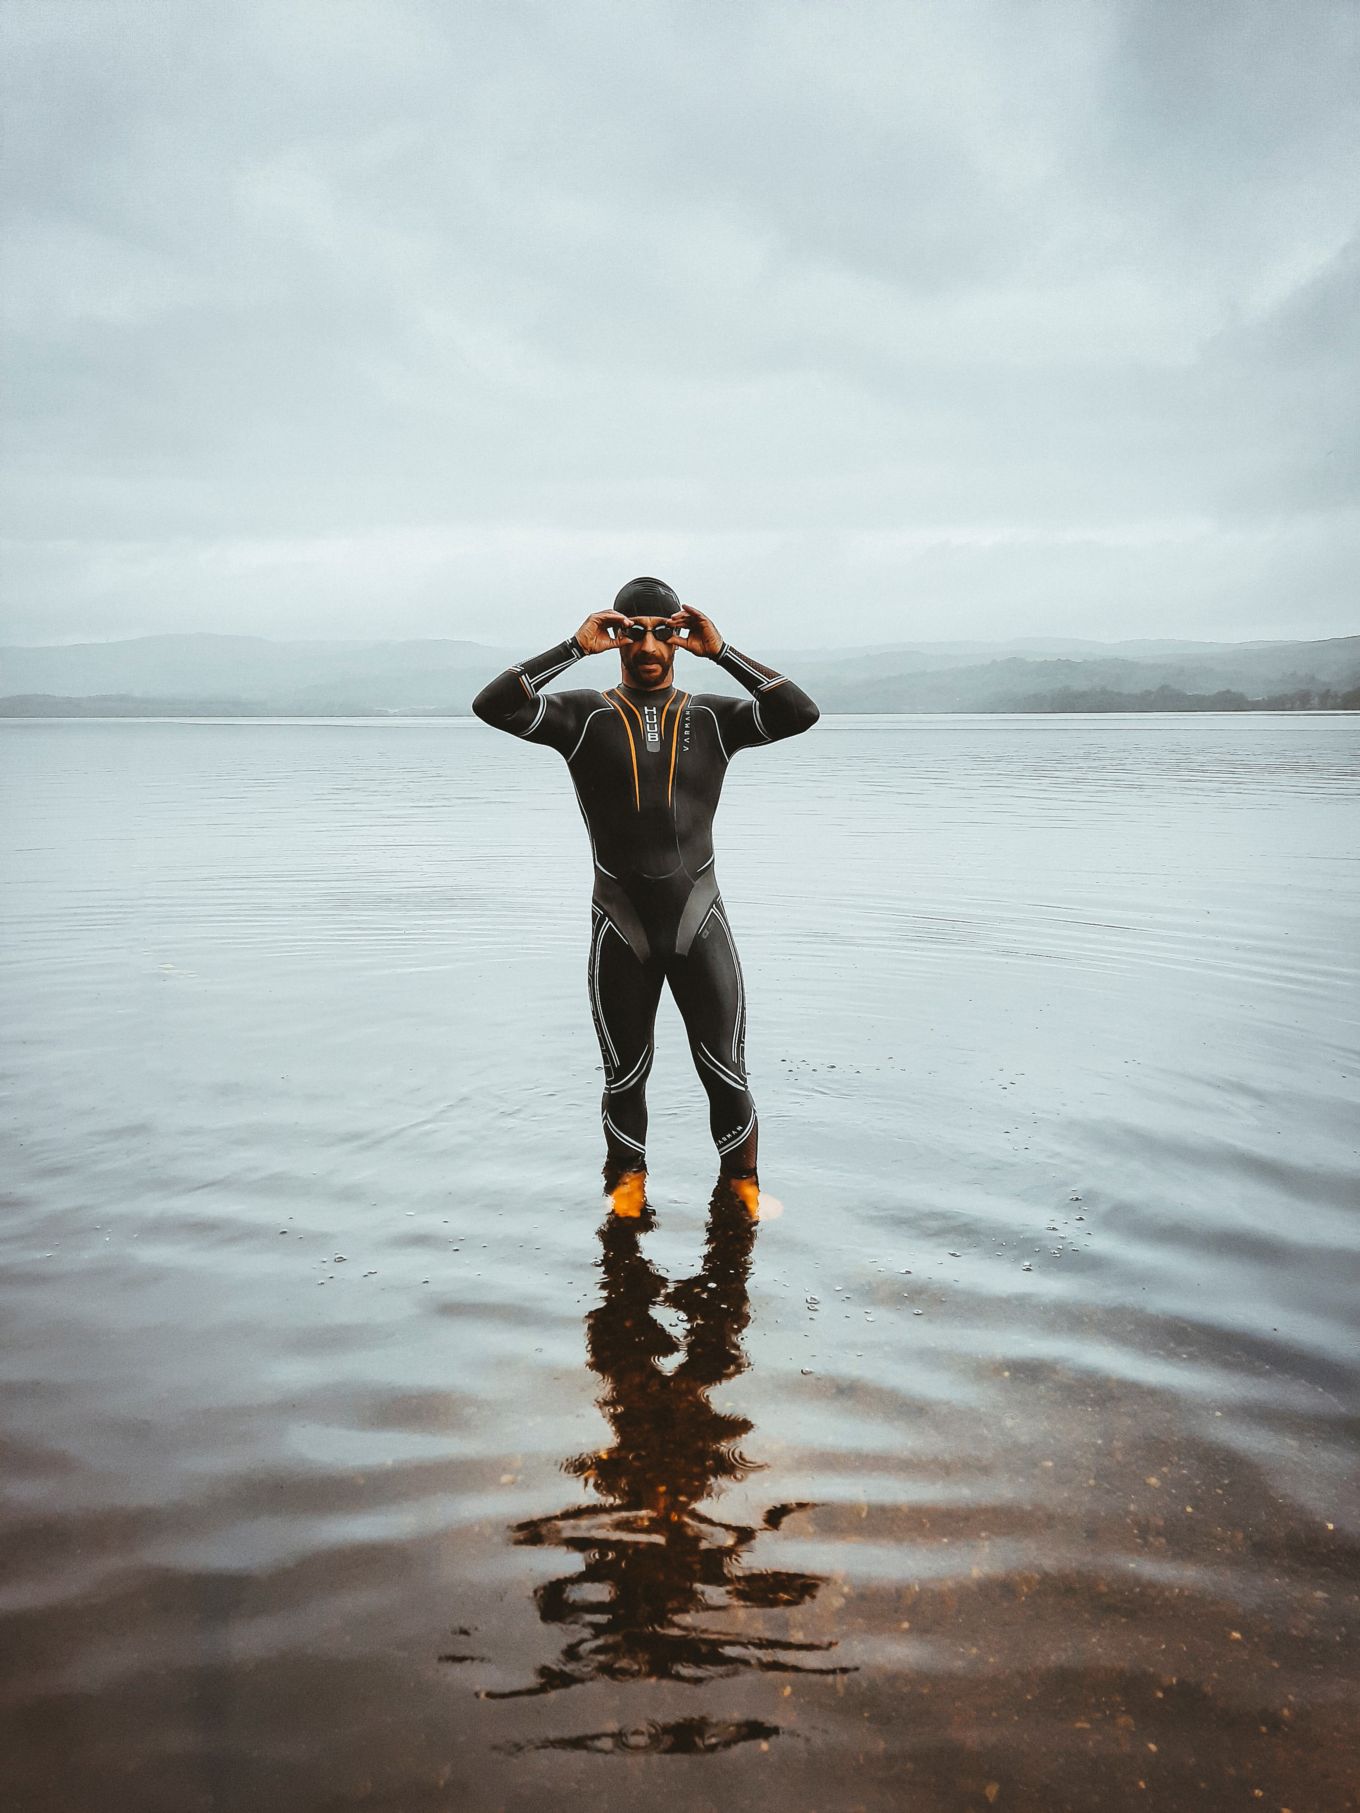 Swimmer stands in a lake.